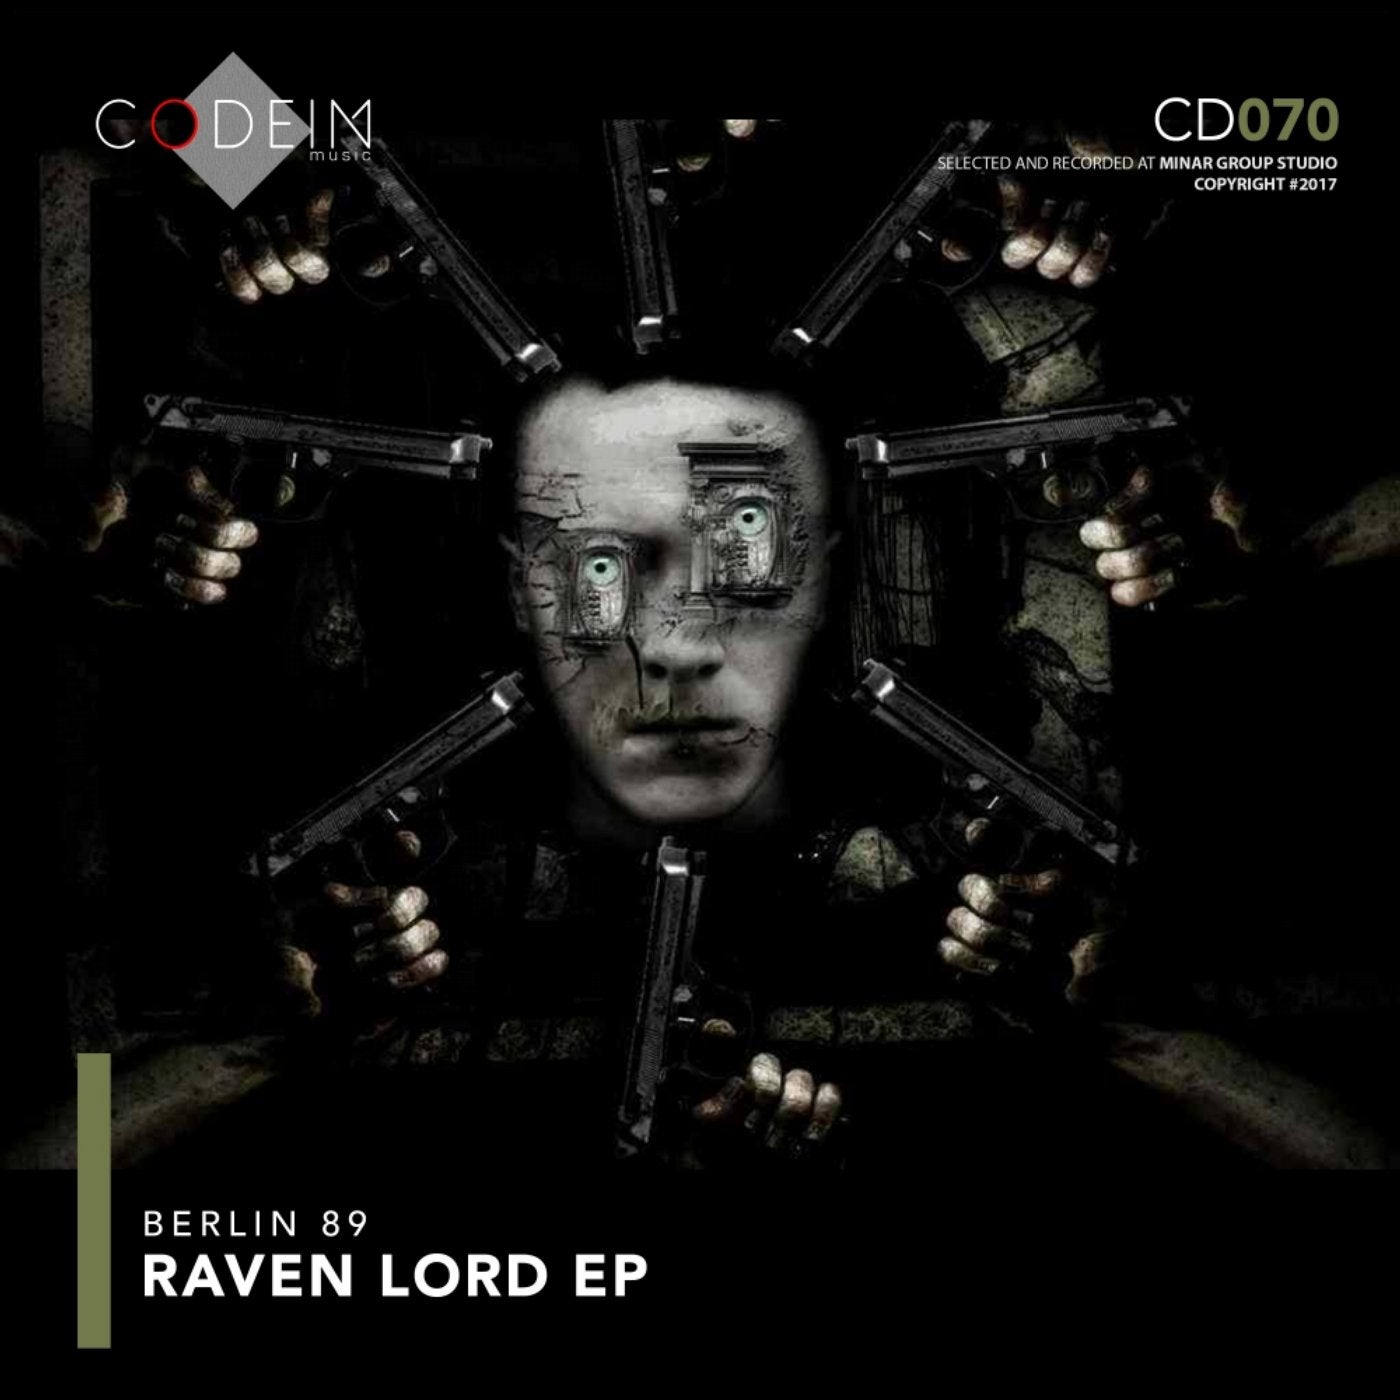 Raven Lord EP